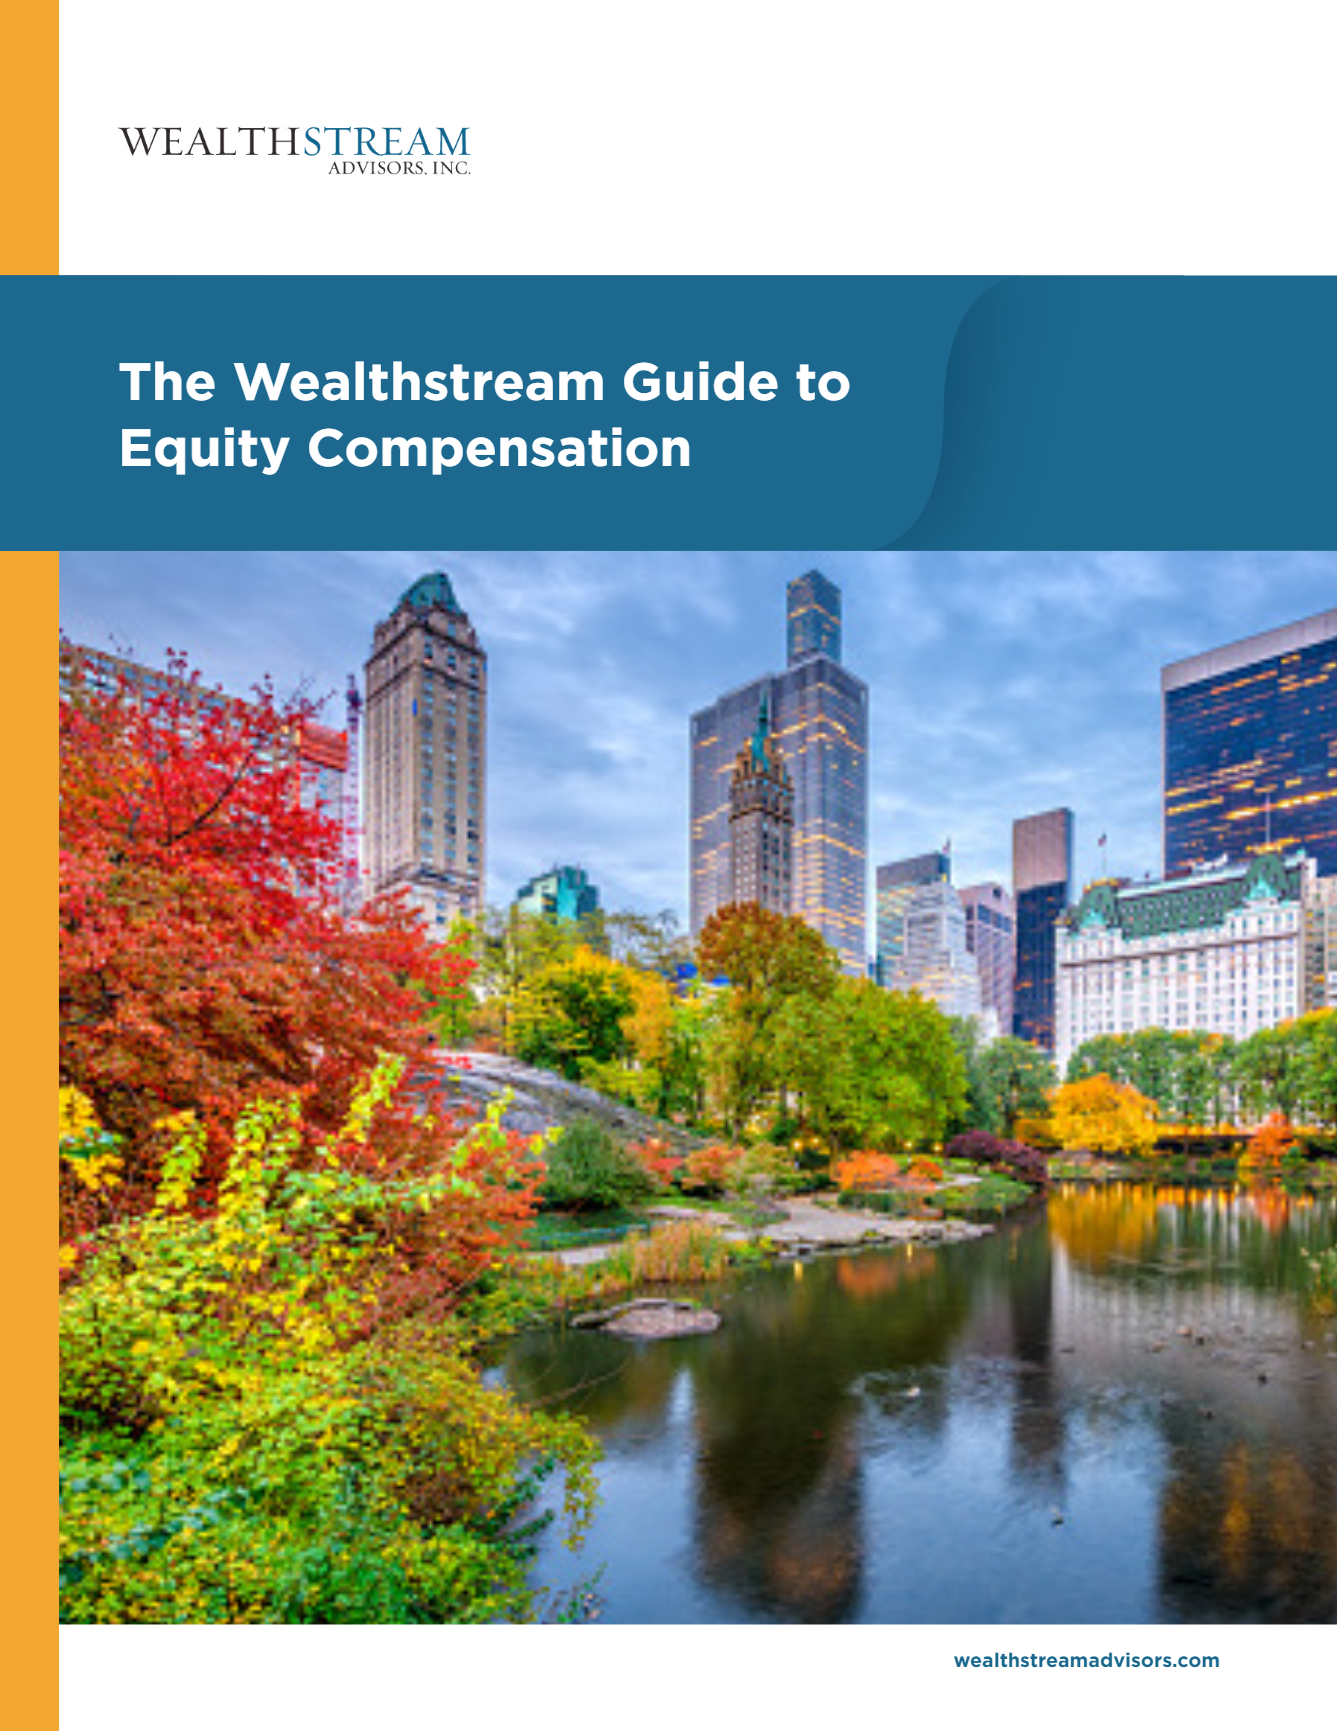 Welcome to the Wealthstream Guide to Equity Compensation